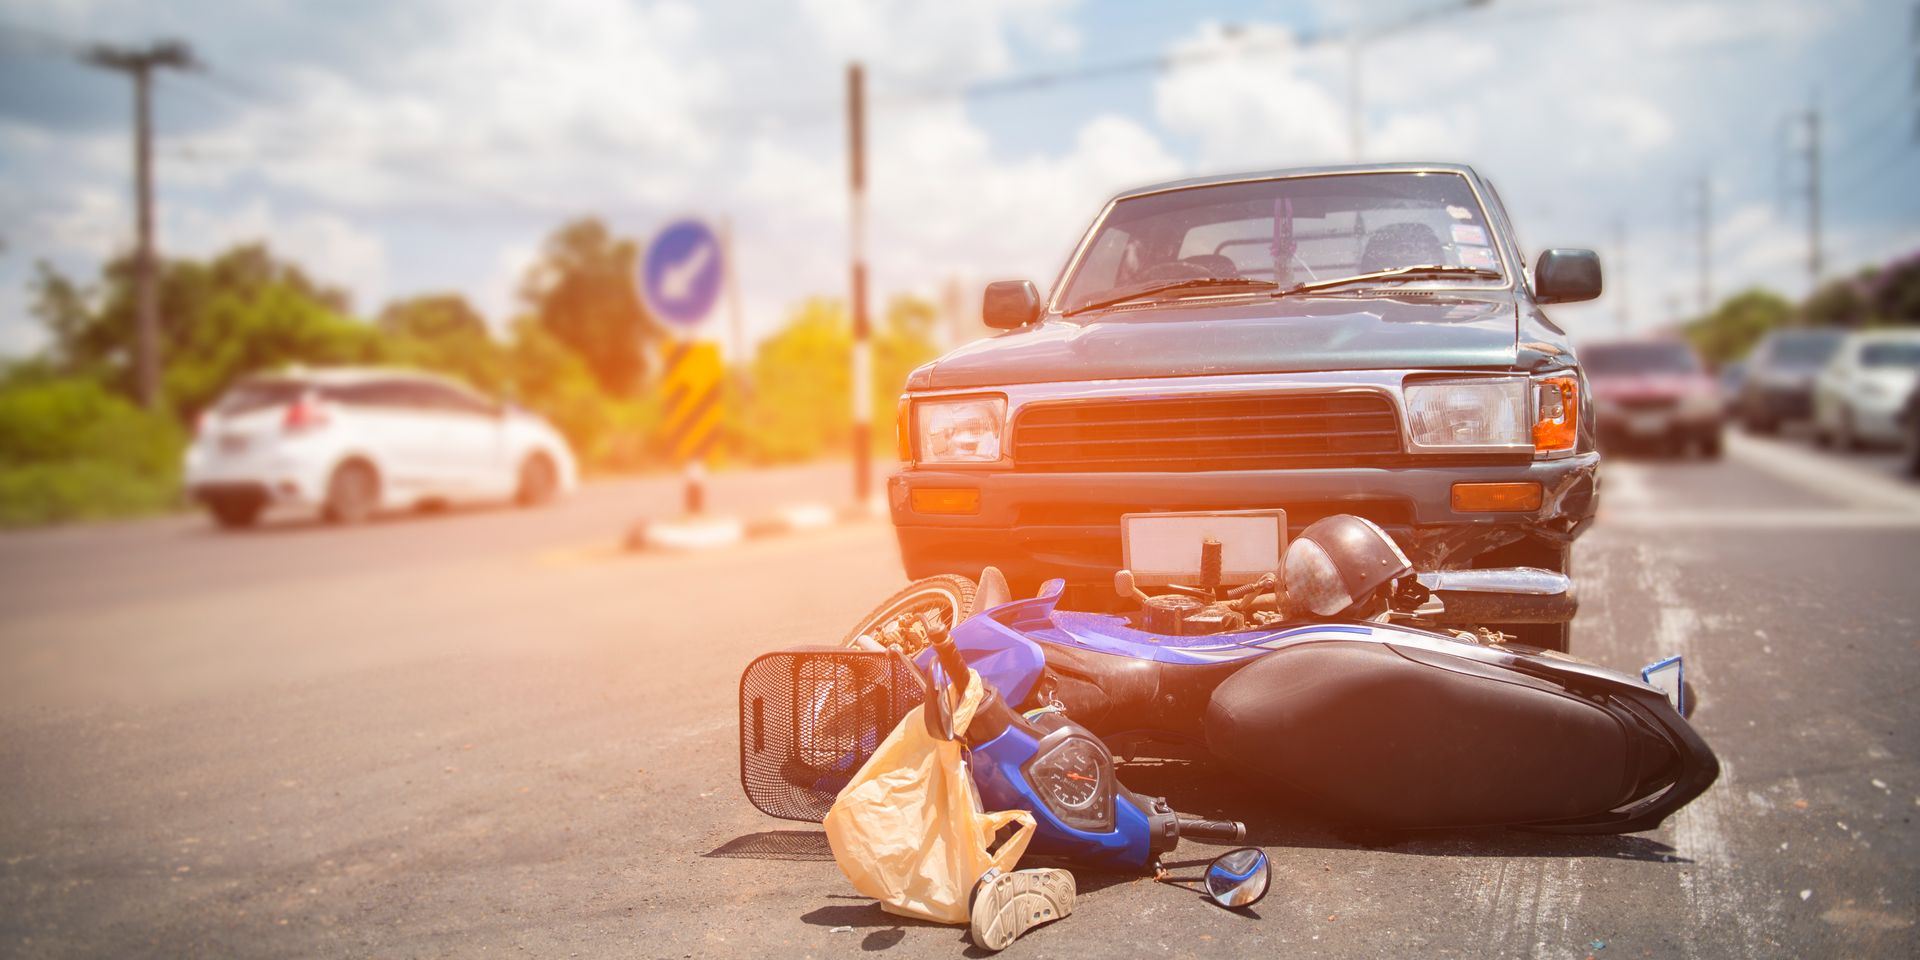 Can You File A Motorcycle Accident Lawsuit if You Weren’t Wearing A Helmet?